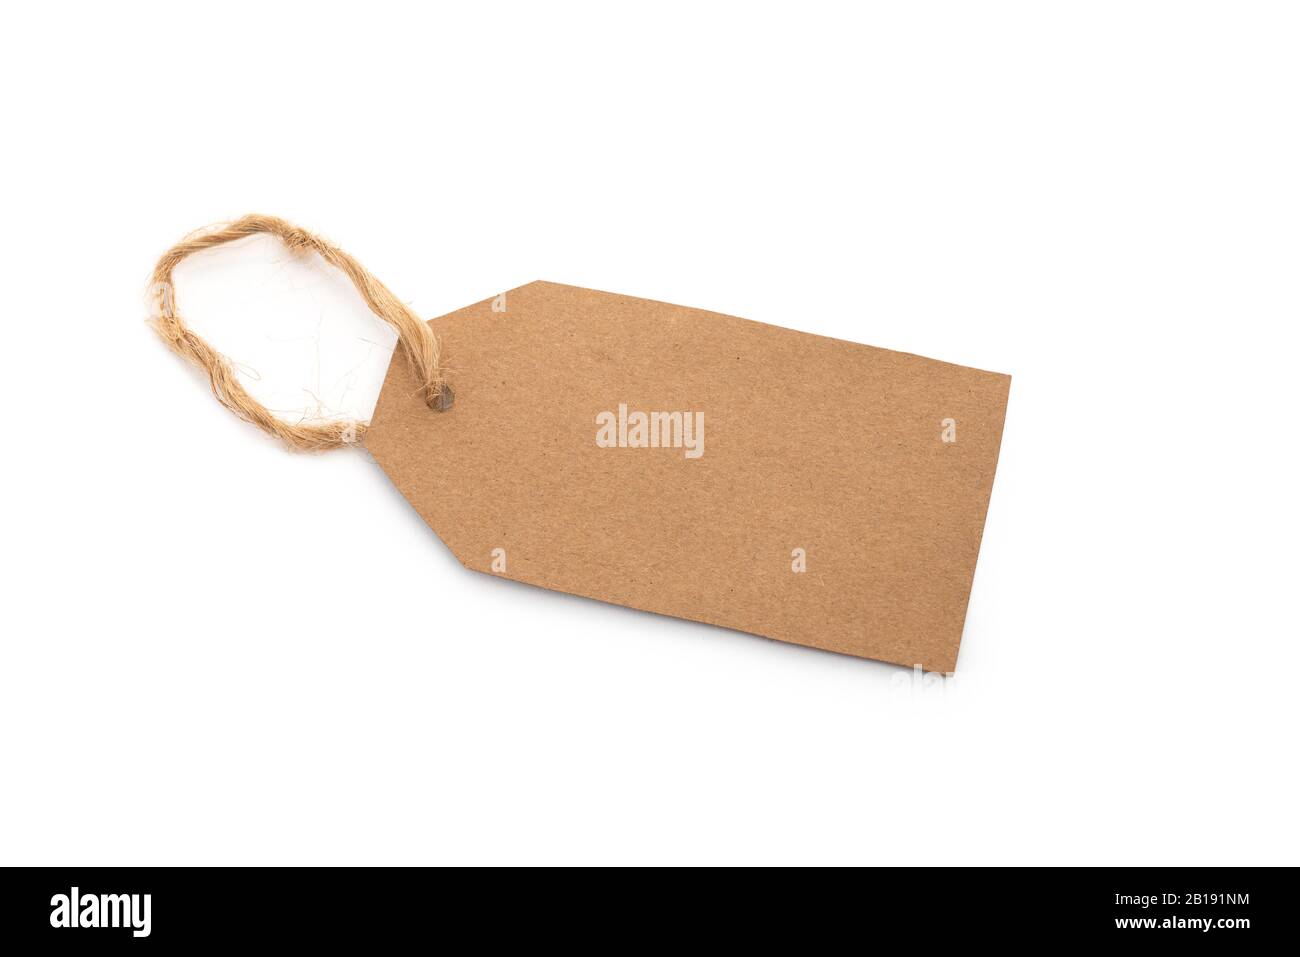 Price, discount or information tag on recycled paper with a hanging string. isolated on white Stock Photo